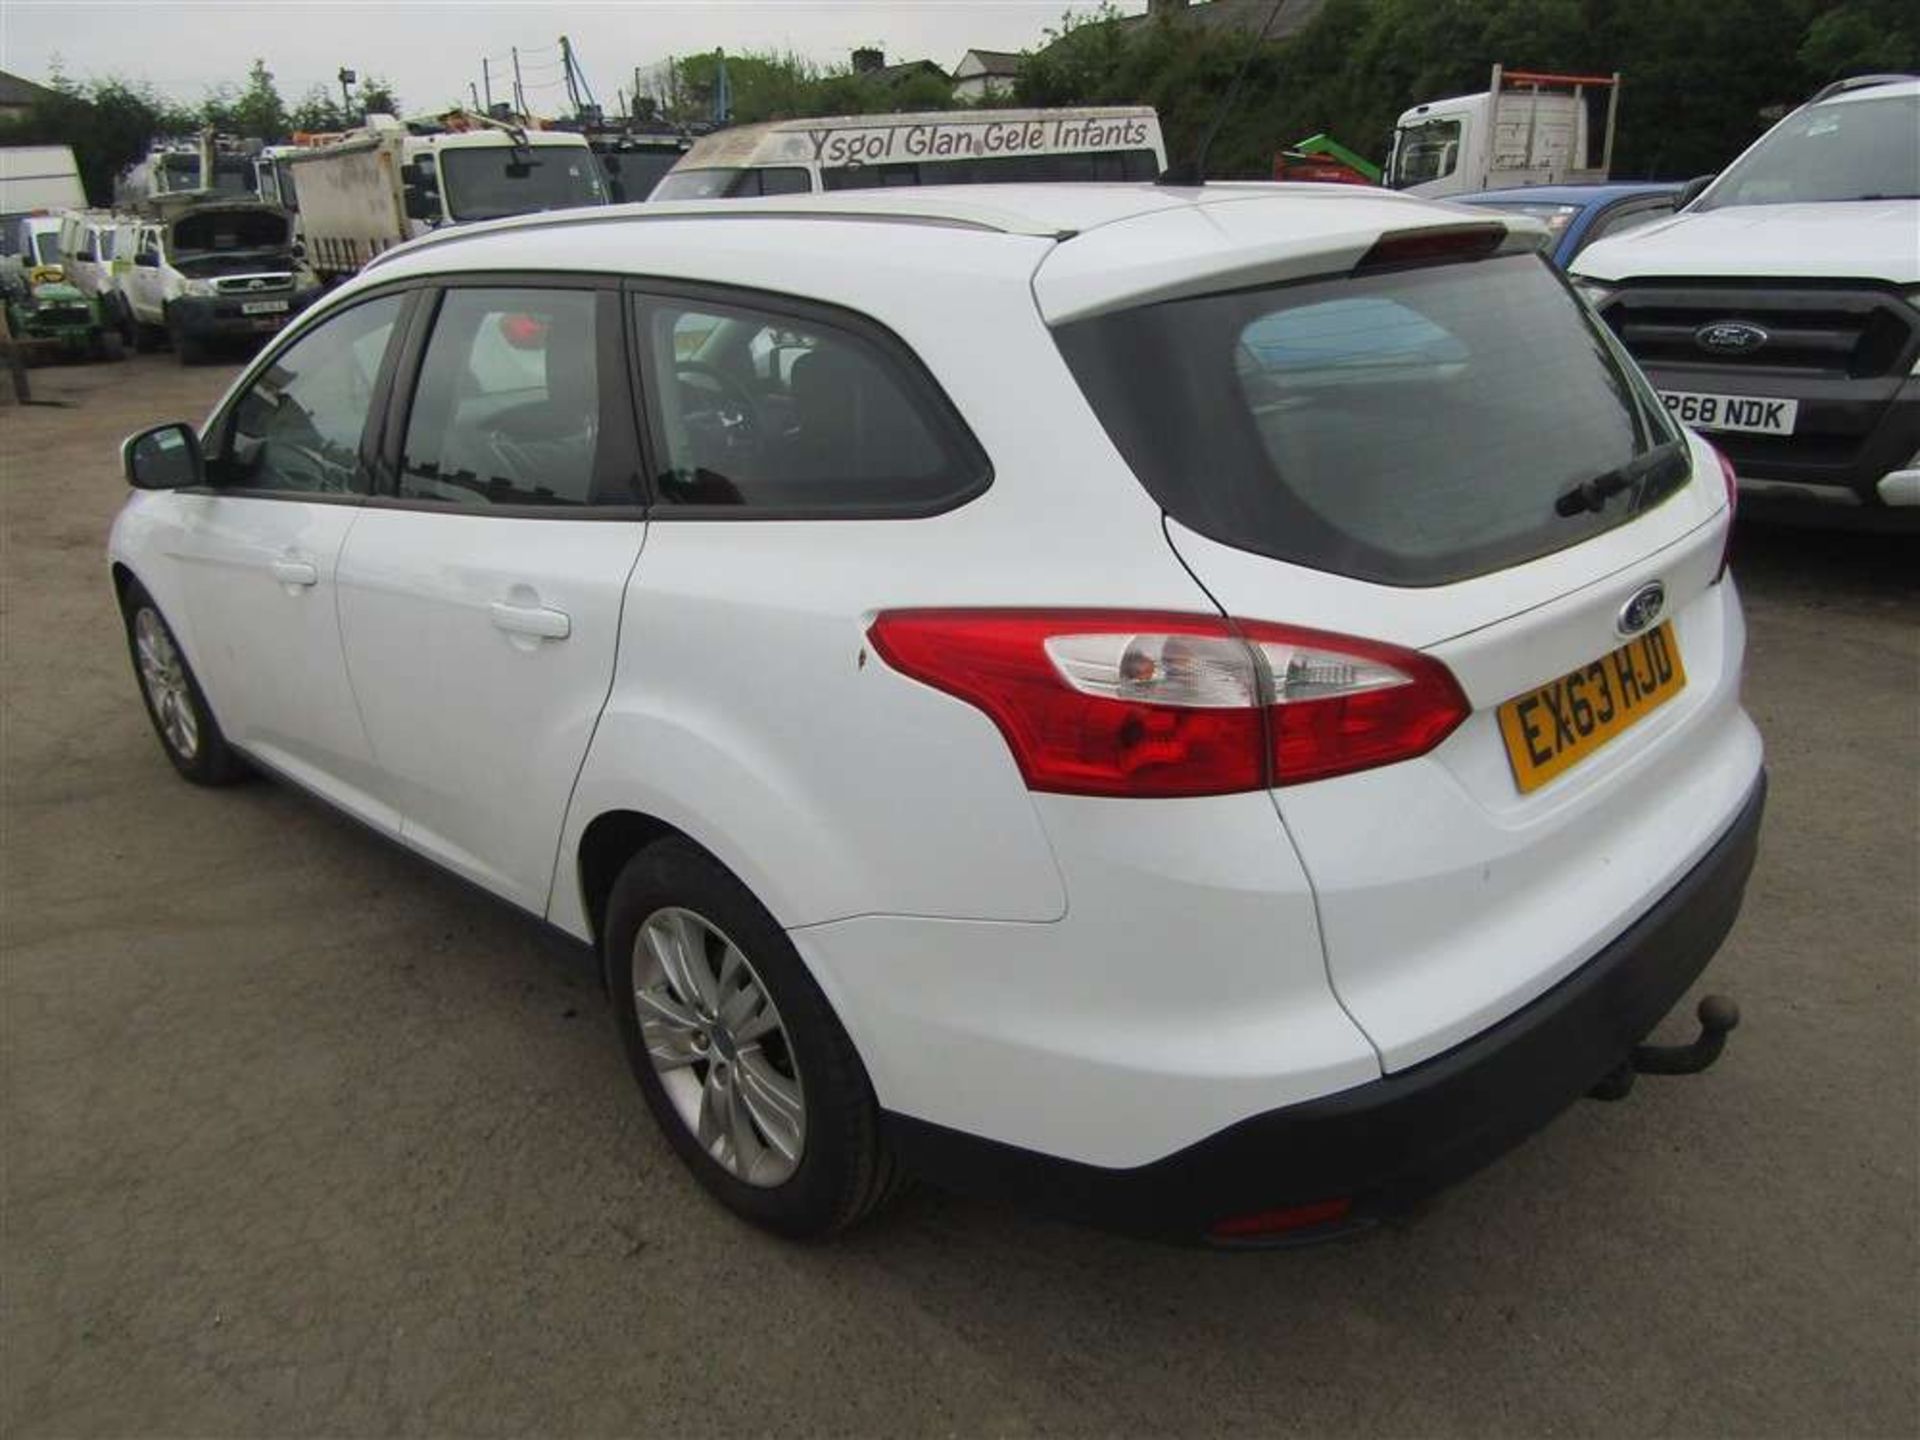 2013 63 reg Ford Focus Edge TDCI 95 (Direct Fire & Rescue Service) - Image 4 of 6